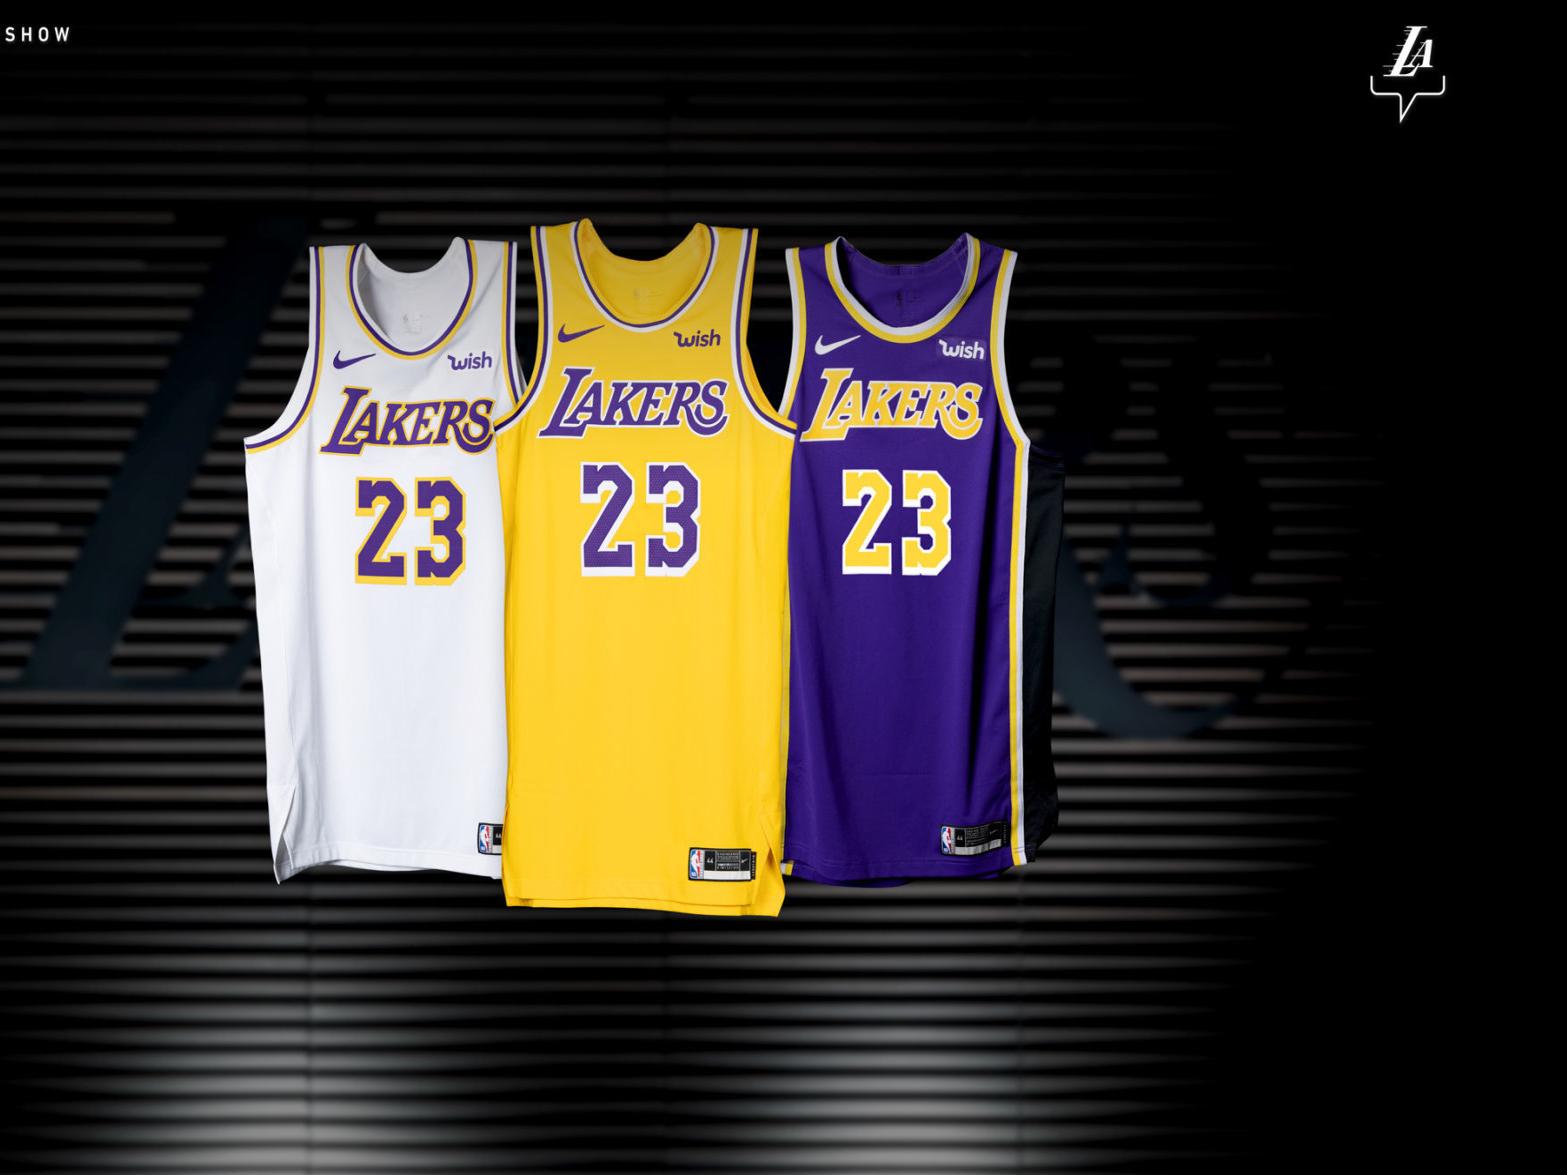 lakers white jersey 2021